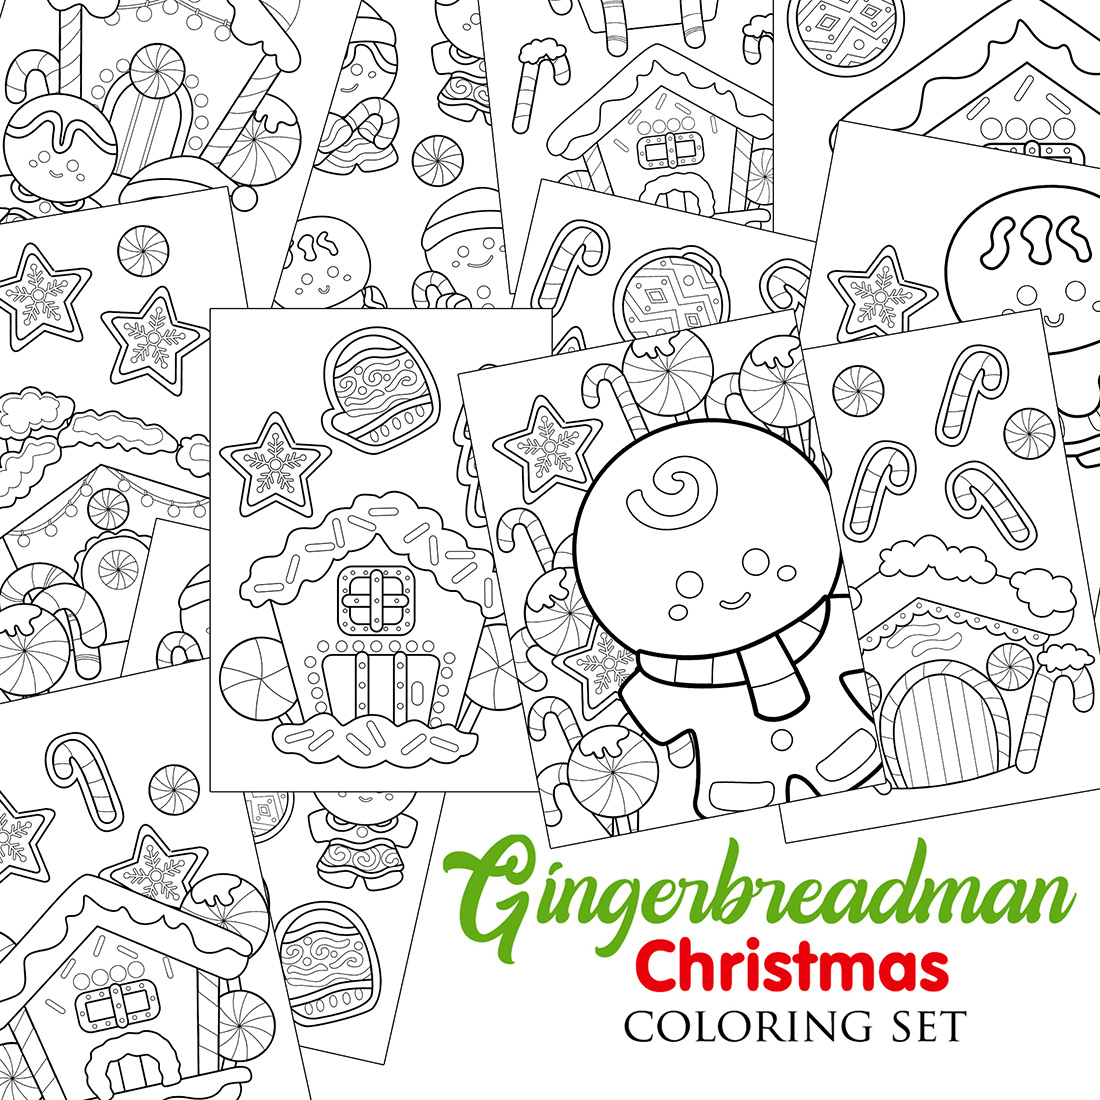 Cute Gingerbread Christmas Cookies and House Decoration Object Character Cartoon Coloring Pages for Kids and Adult Activity cover image.